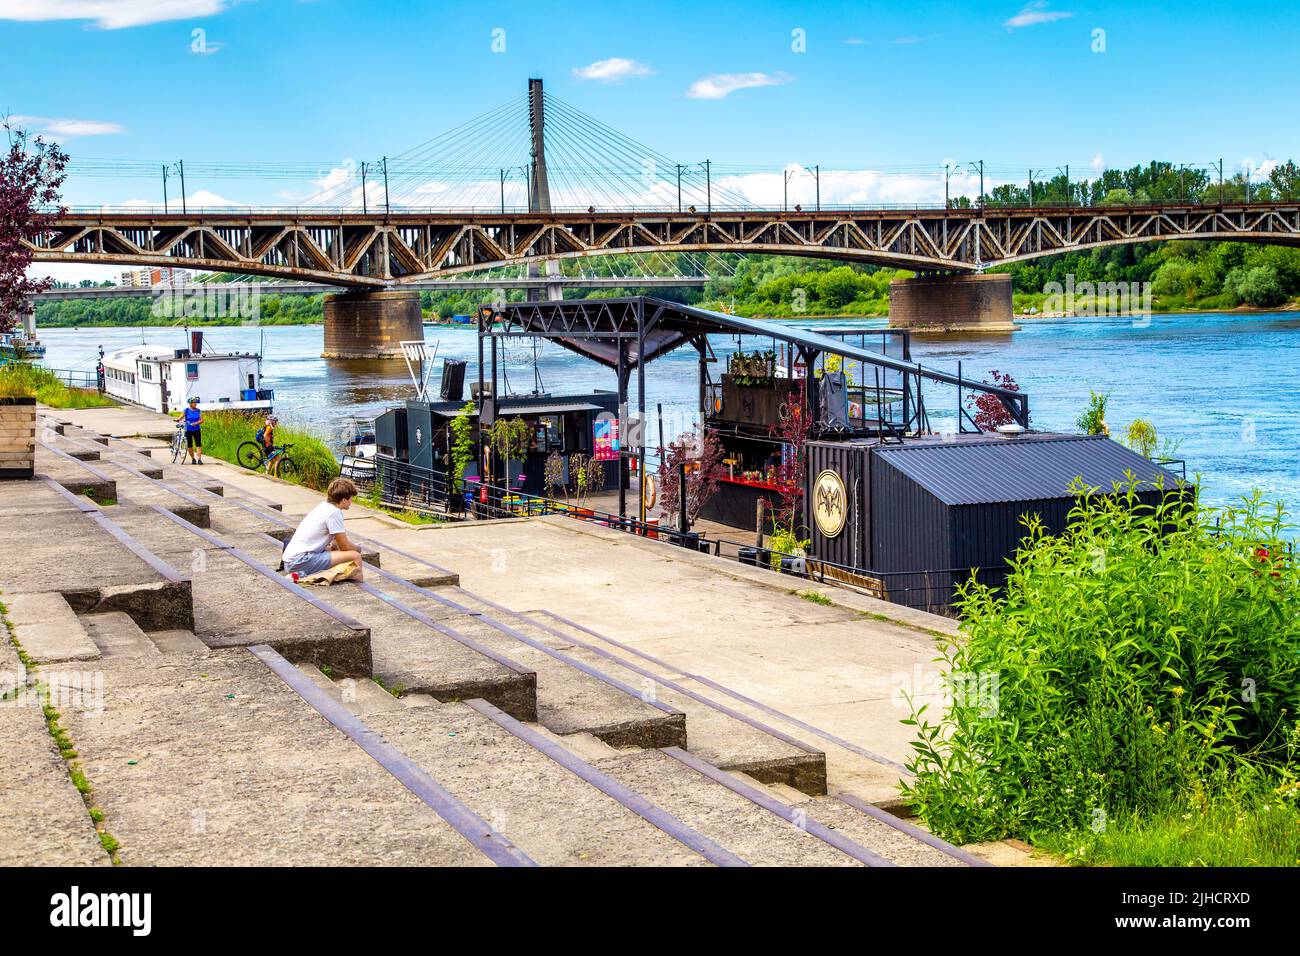 Bar and club Wir on a barge on the Vistula River with Poniatowski Bridge in background, Powisle, Warsaw, Poland Stock Photo